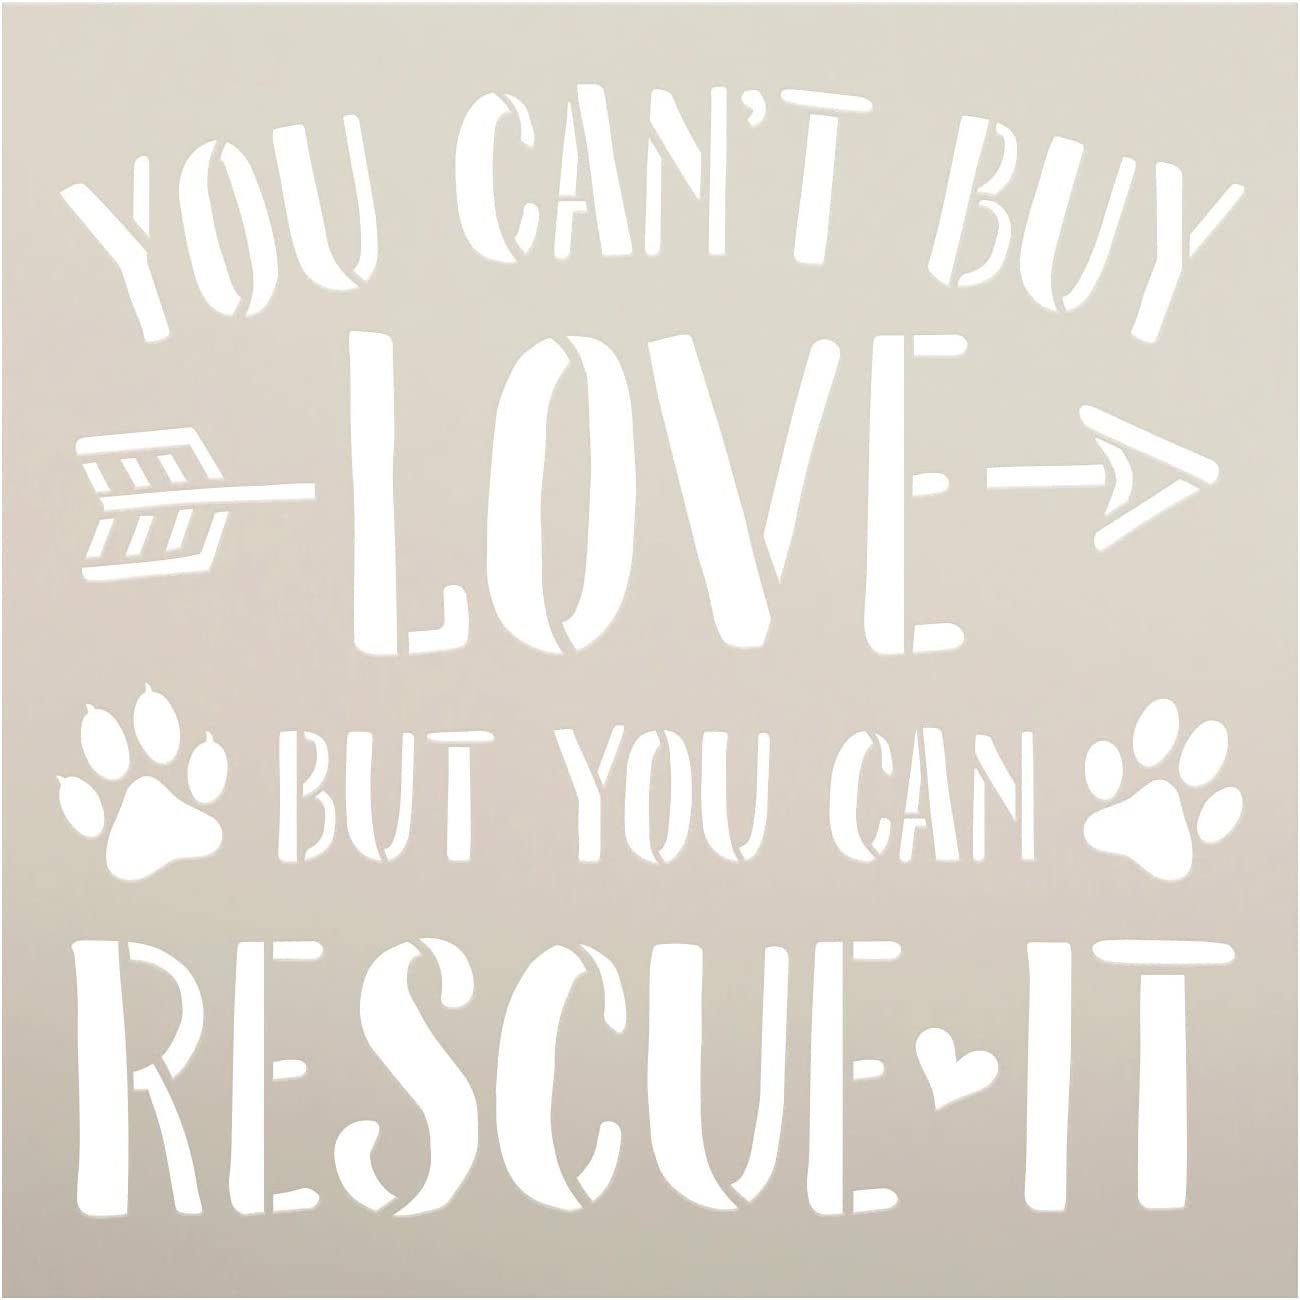 Cant Buy Love - Rescue It Stencil by StudioR12 | DIY Dog Cat Lover Home Decor Gift | Craft & Paint Wood Sign | Reusable Mylar Template | Select Size